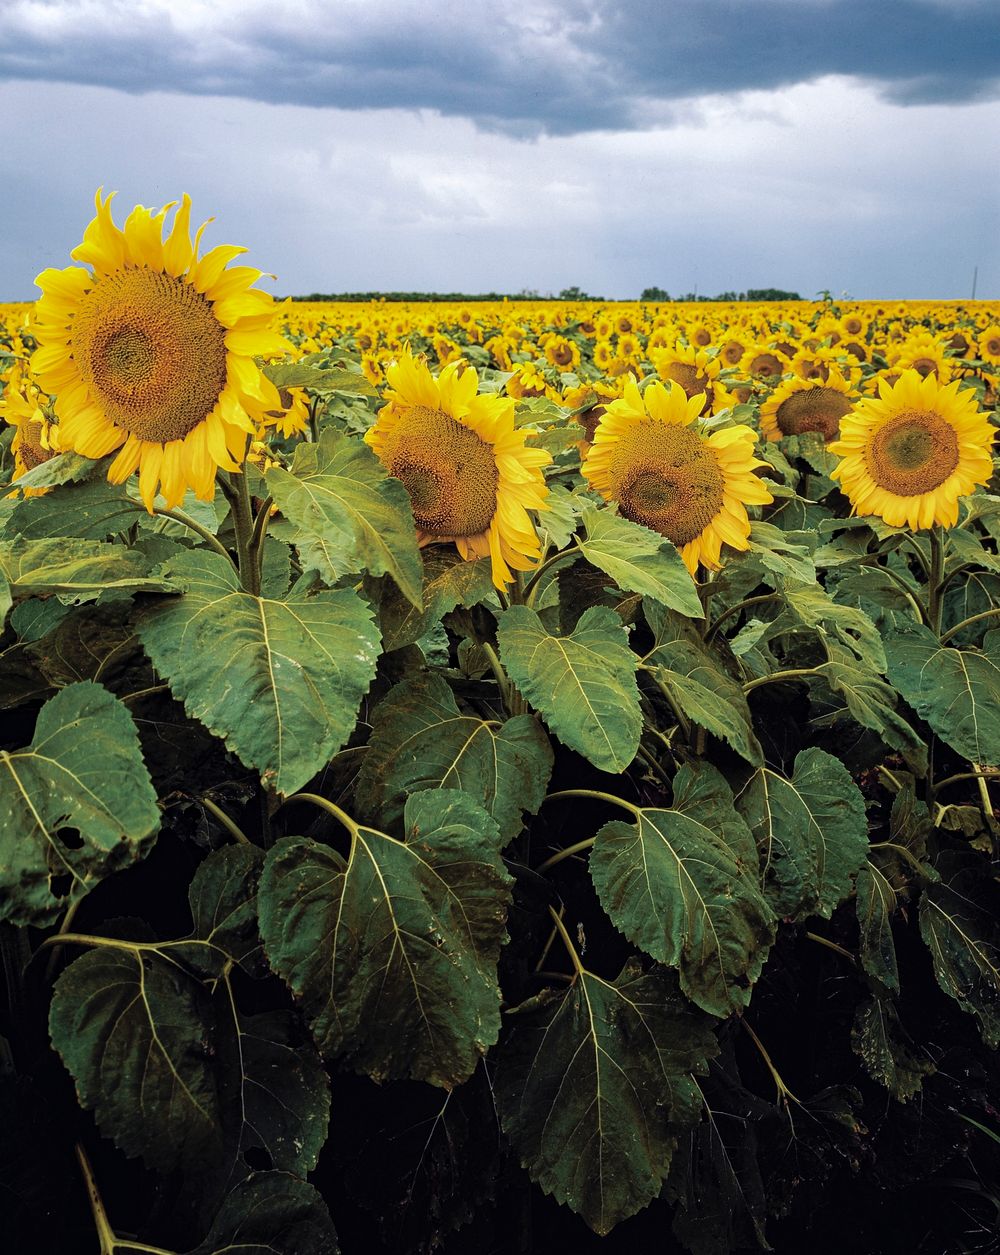 A Kansas sunflower field up close. Original image from Carol M. Highsmith&rsquo;s America, Library of Congress collection.…